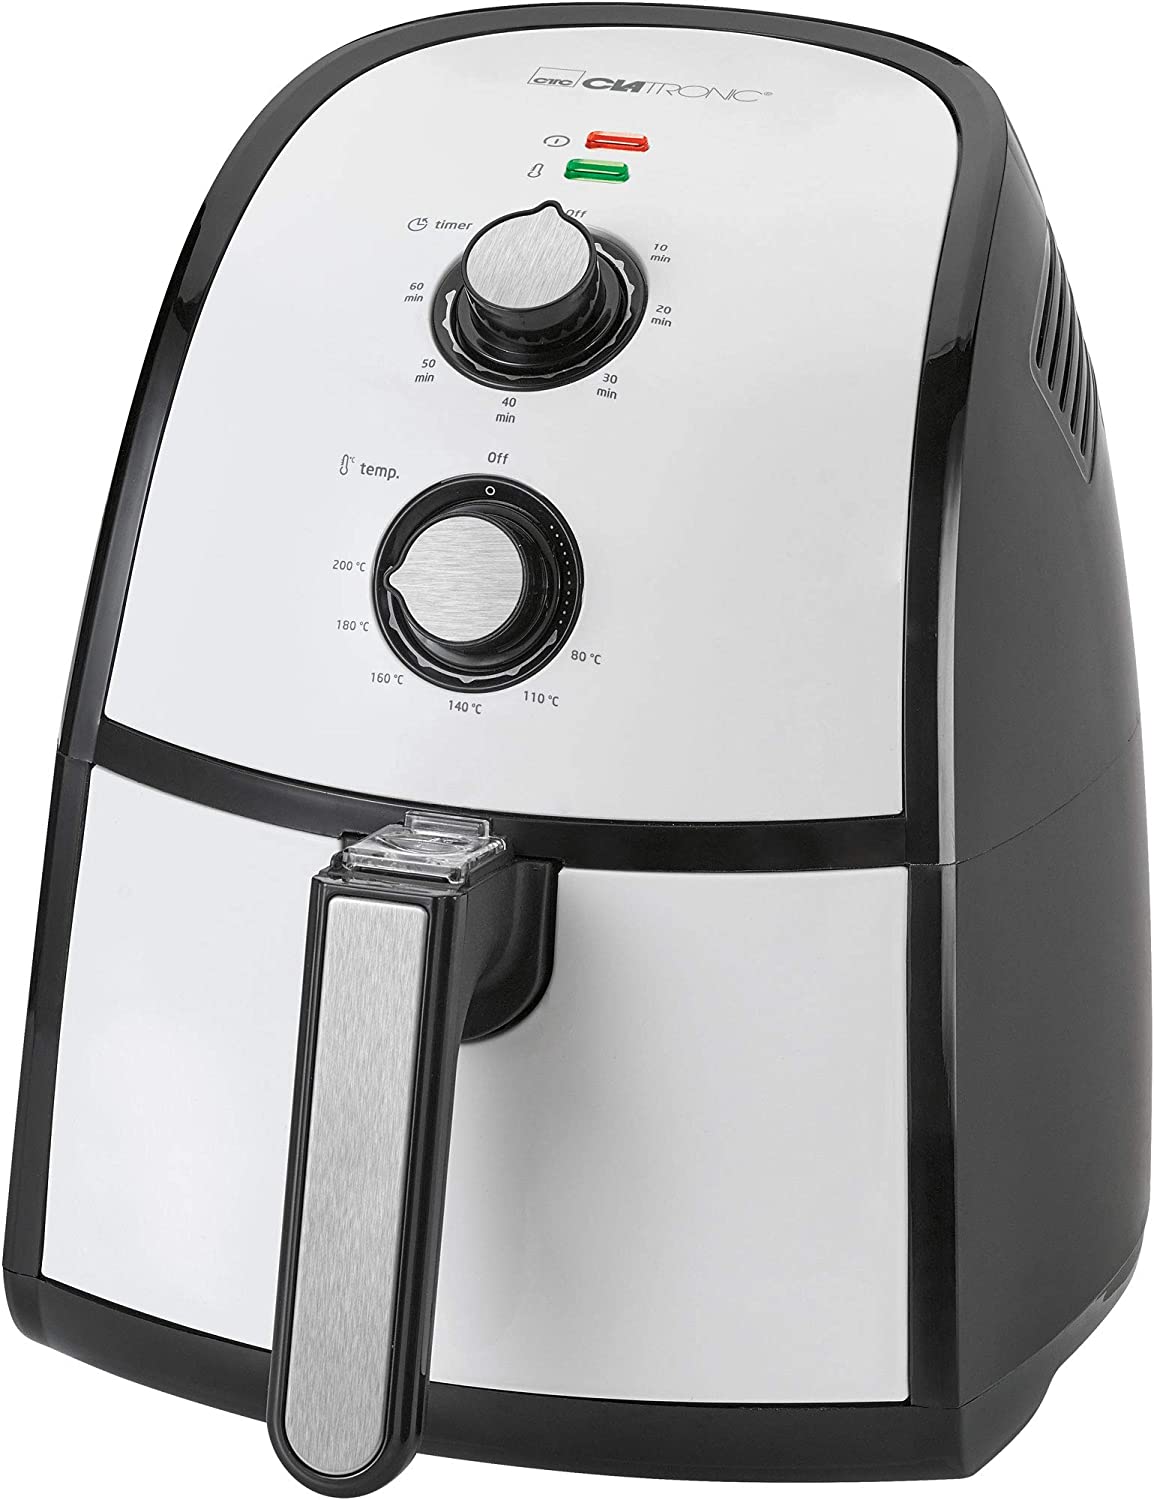 Clatronic FR 3667 H Hot Air Fryer, 2.2 Litre Capacity, Infinitely Adjustable Thermostat, Timer, 1500 W, Black/White